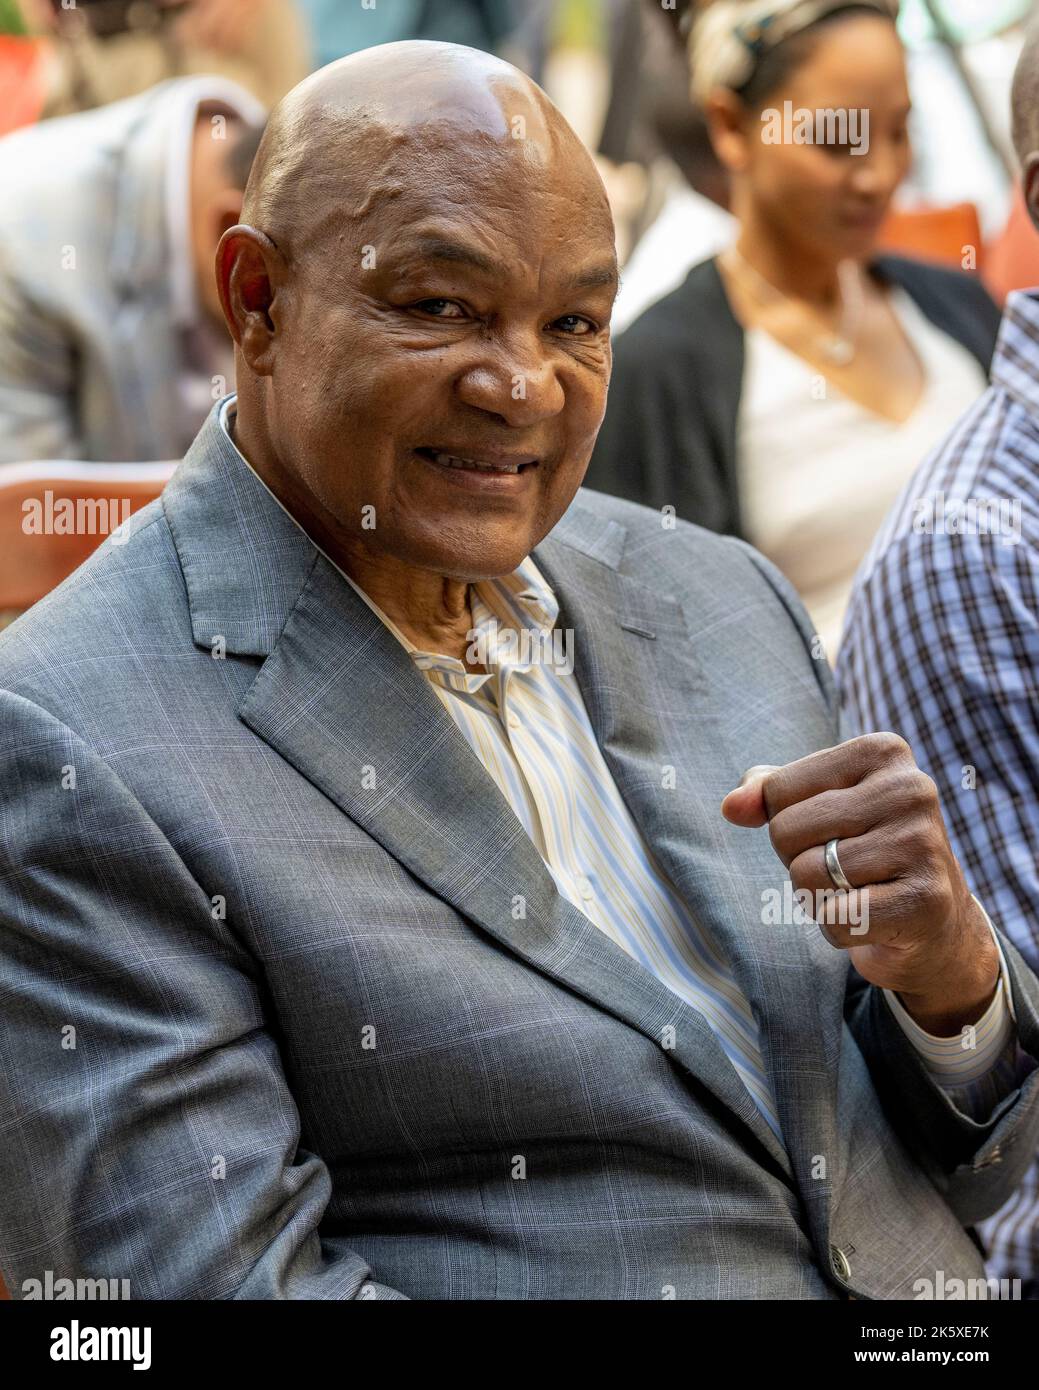 Two-time world heavyweight champion and an Olympic gold medalist George Foreman at the Harris County Houston Sports Authority Fountain Reveal and Hous Stock Photo